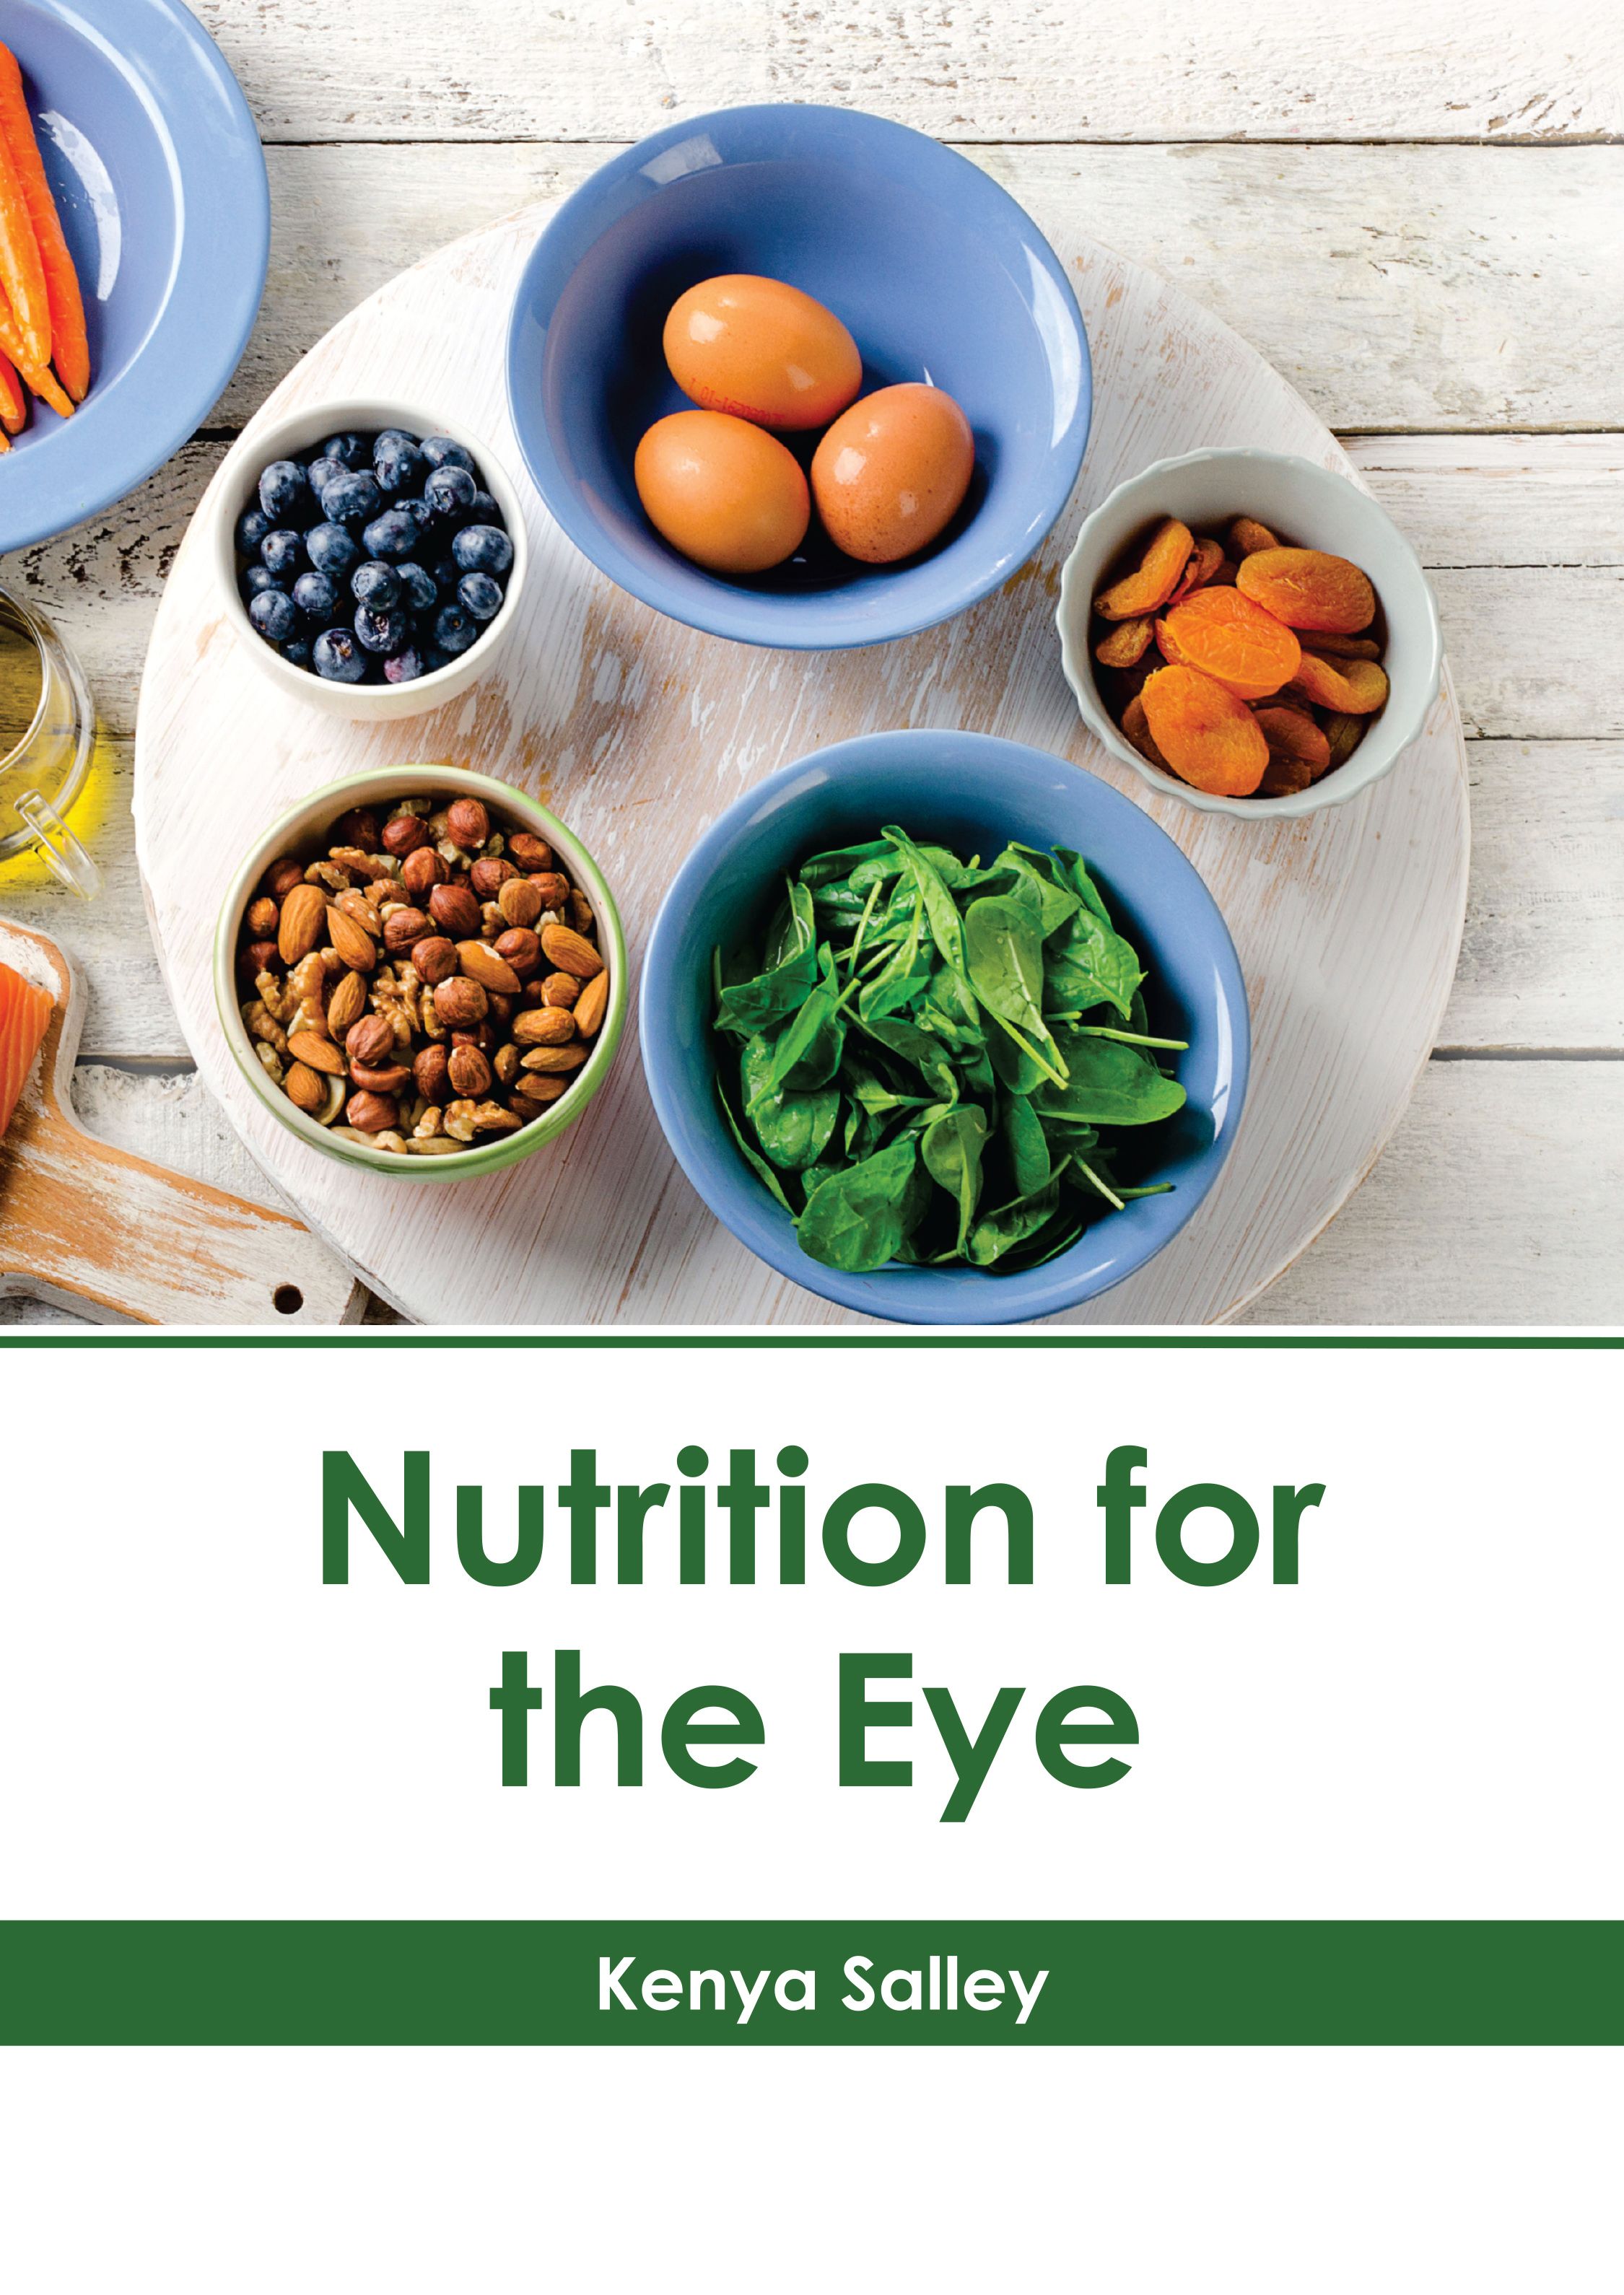 NUTRITION FOR THE EYE